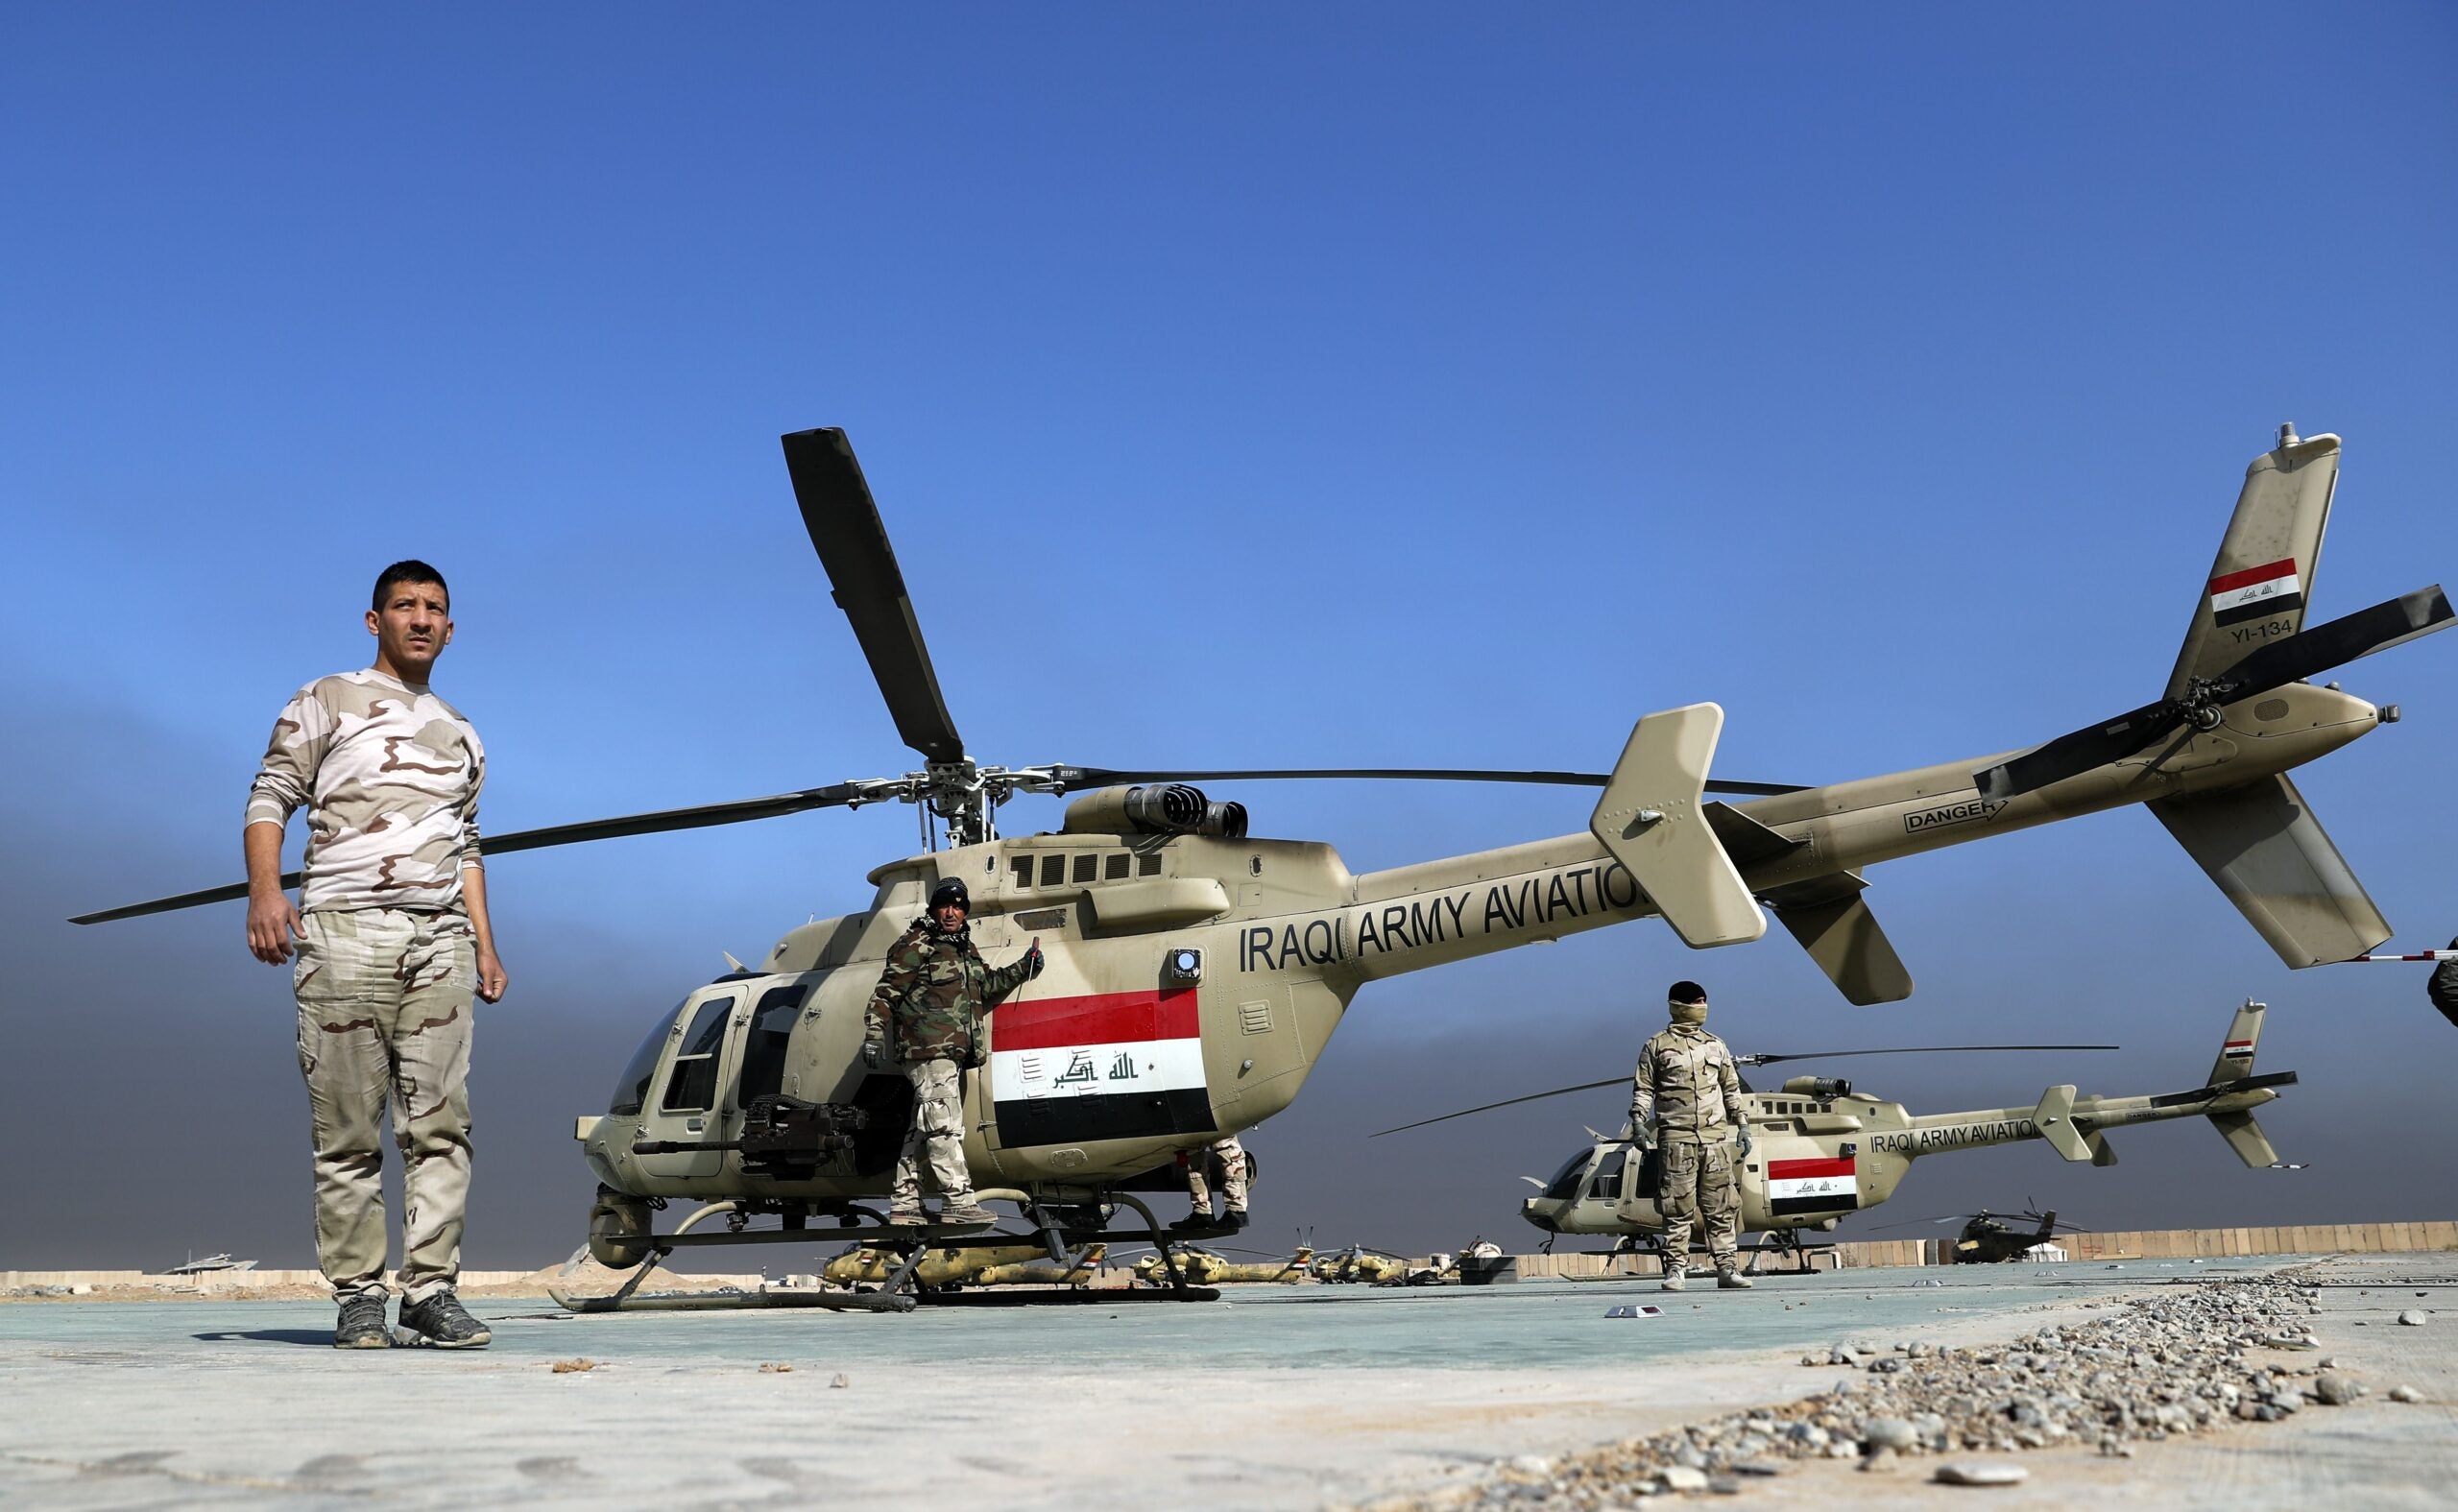 TOPSHOT - Iraqi soldiers perform maintenance on an airforce Bell 407 helicopter at the army base of Qaryat Jaddalat, south of the city of Mosul on November 25, 2016, during a massive operation to oust IS jihadists from the country's second city.  / AFP / THOMAS COEX        (Photo credit should read THOMAS COEX/AFP via Getty Images)